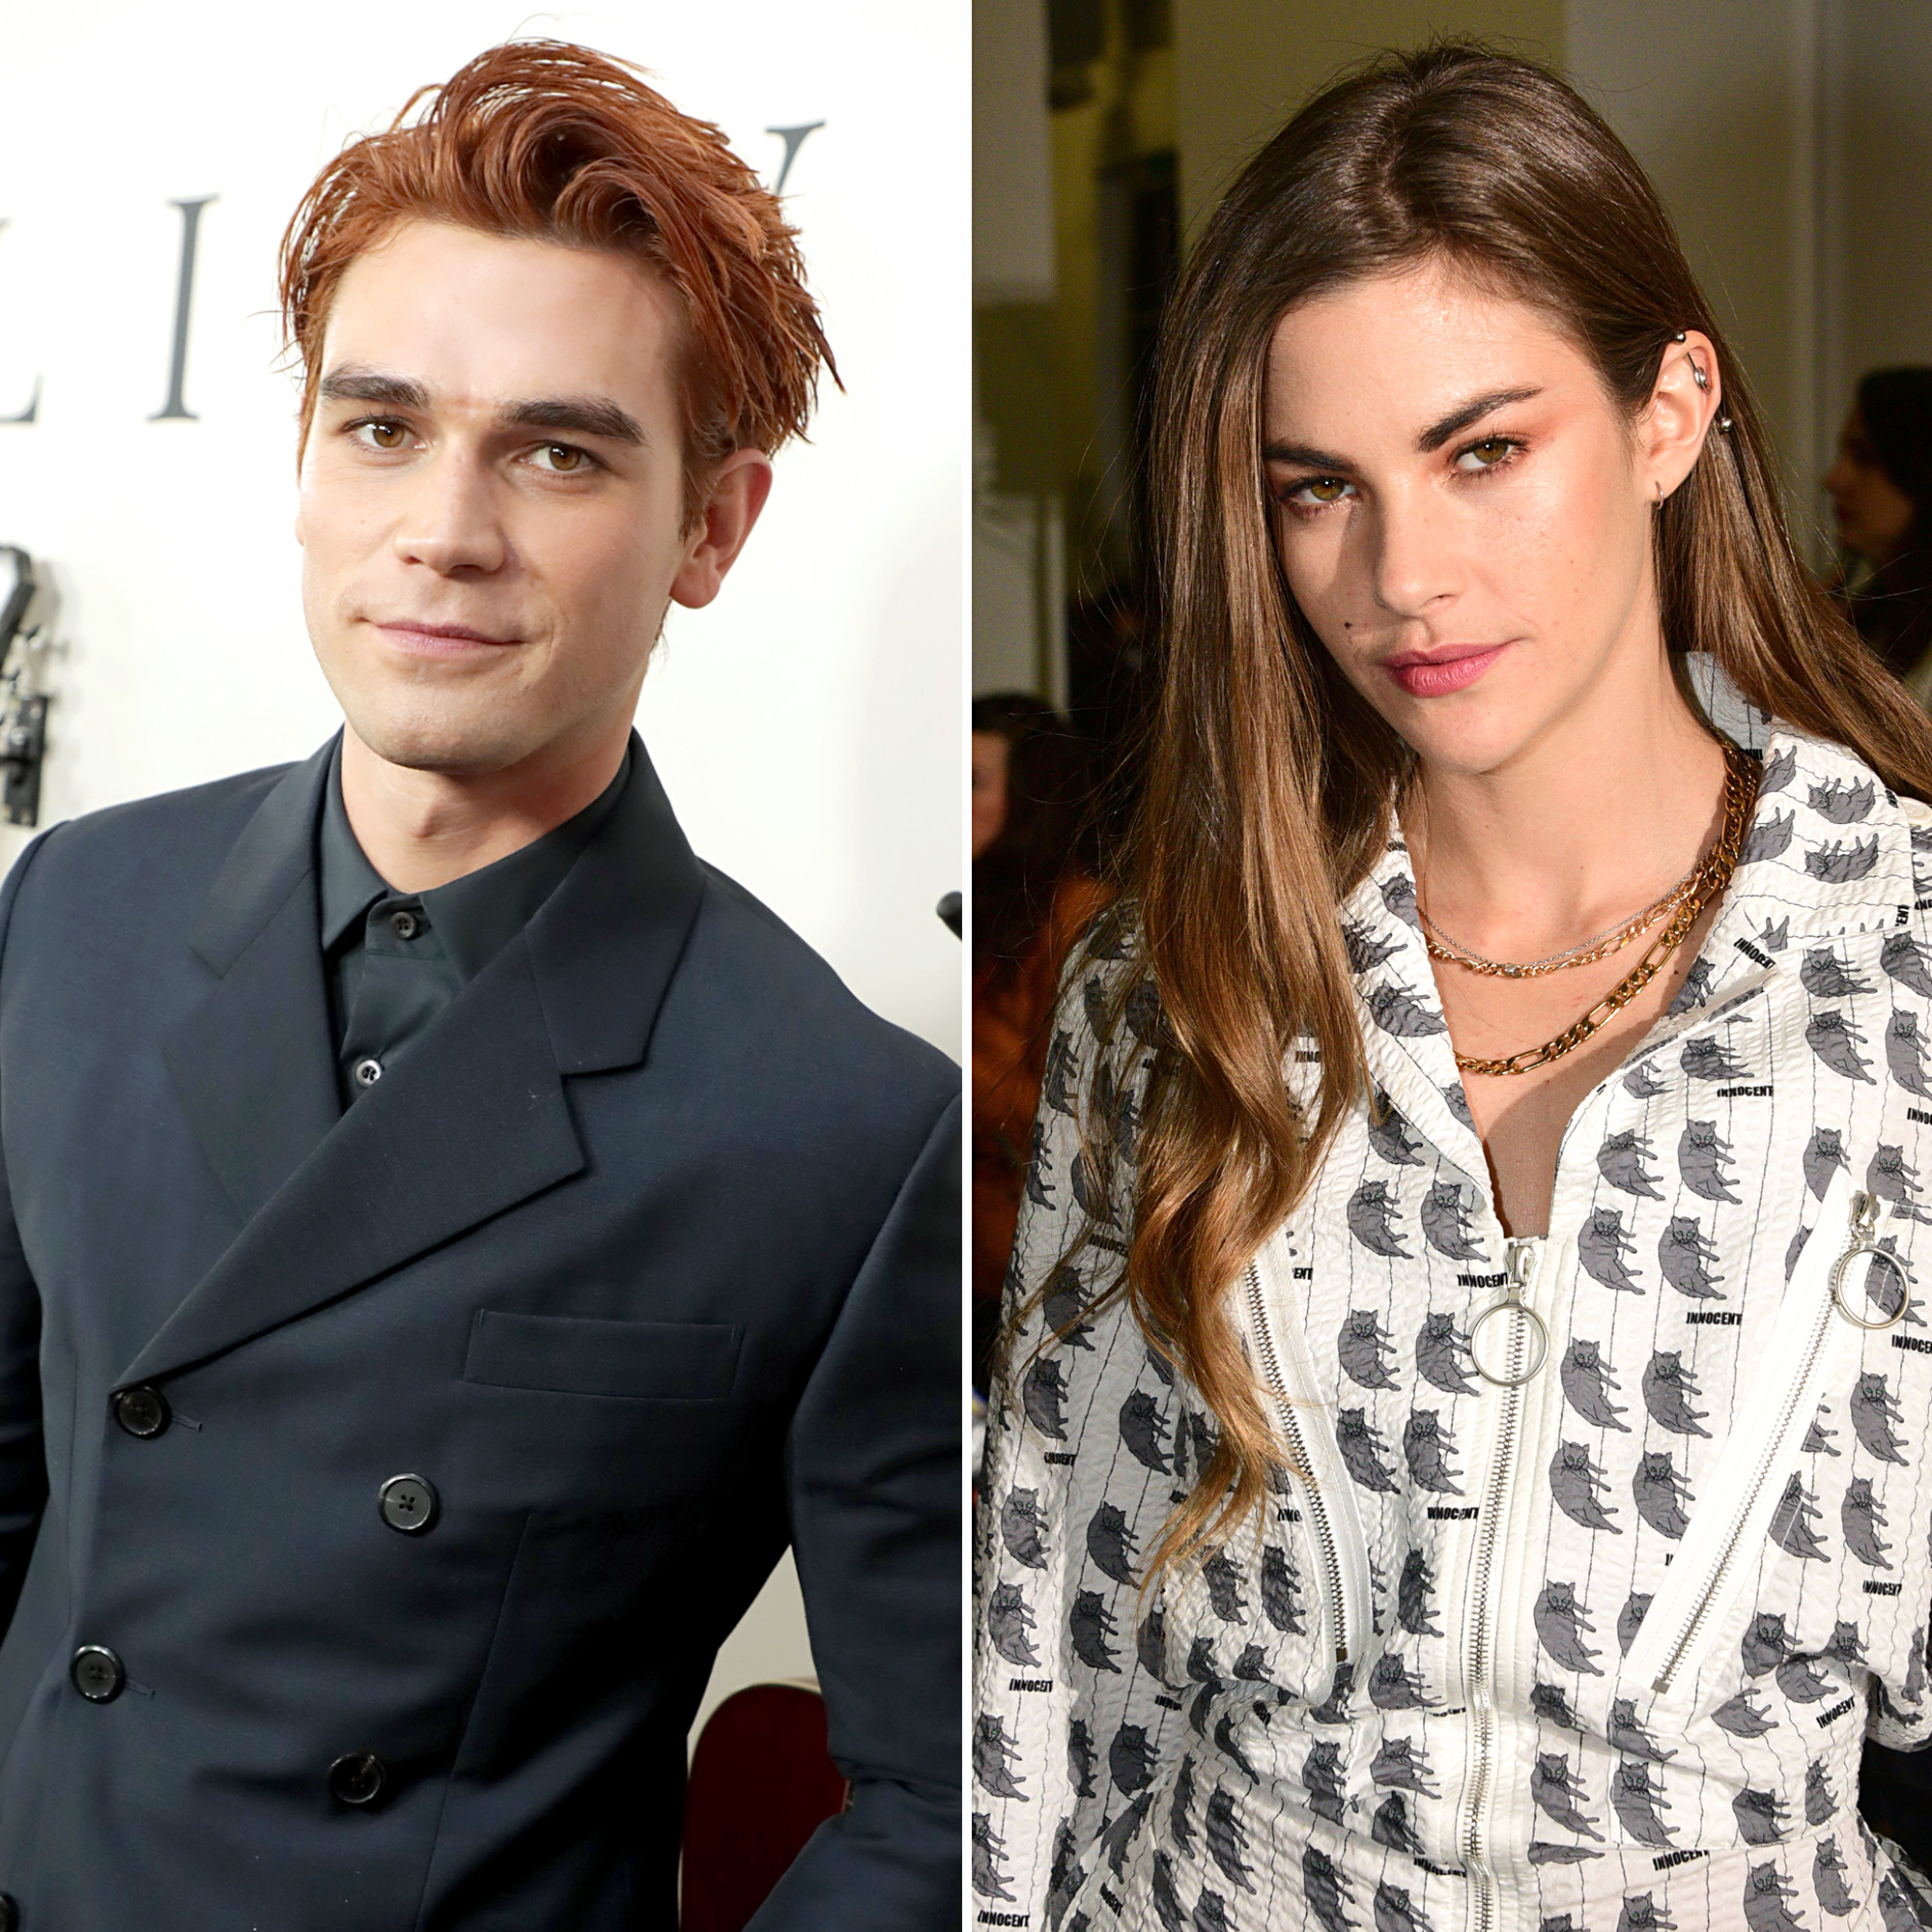 Couple Nudist Party - KJ Apa Takes Nude Photos of Clara Berry, She Declares Love for Him